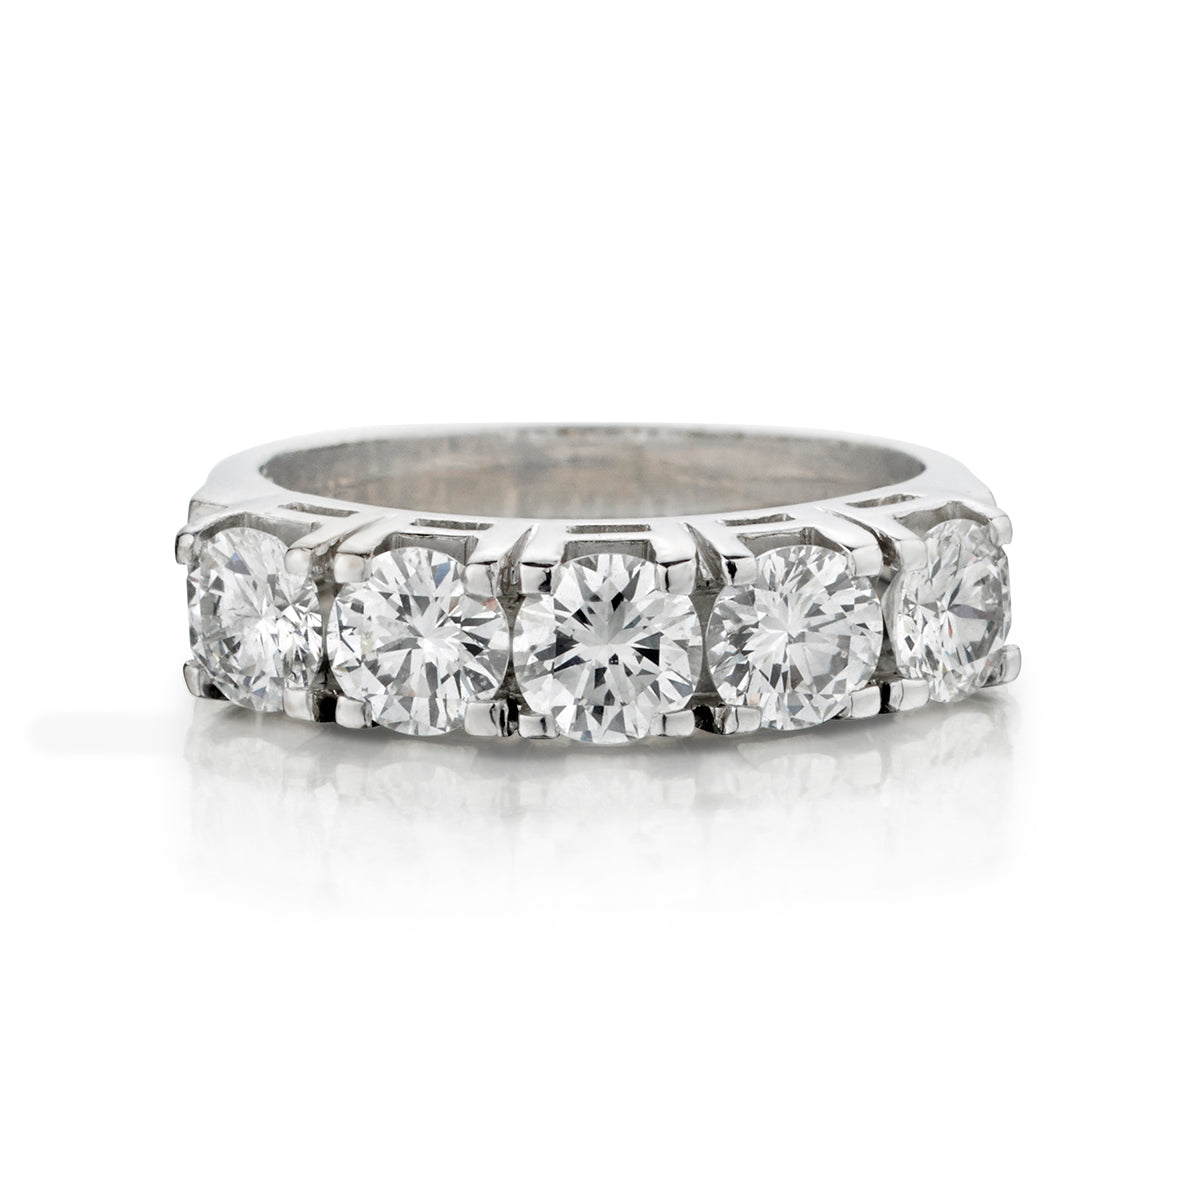 Ladies 18kt White Gold 5 Stone Diamond Ring. 1.52ct Tw (VVS) in Clarity and (F) in Colour.